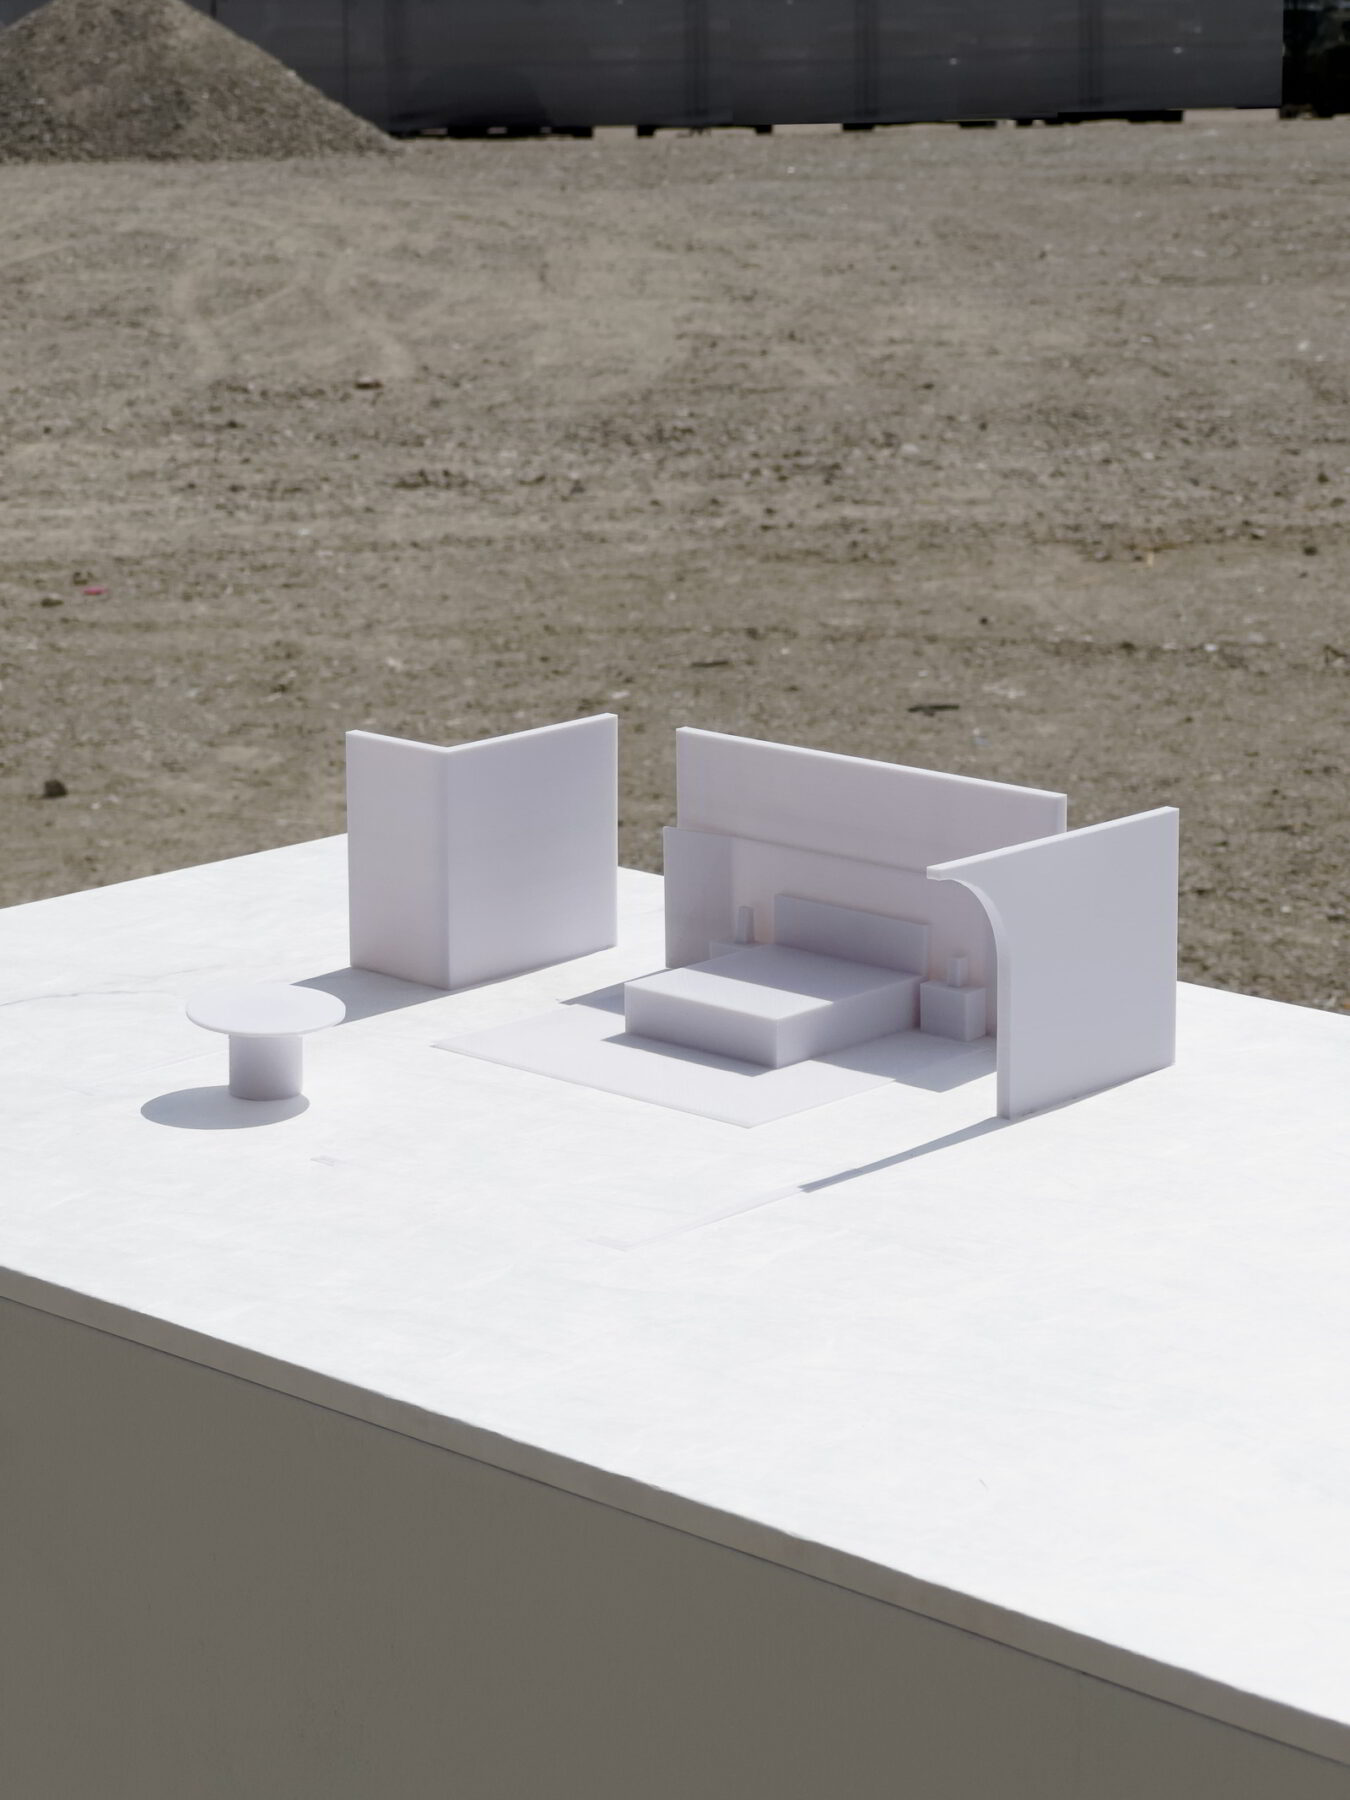 Archisearch A minimalist architect's cell | Thesis project by Theo Galliakis